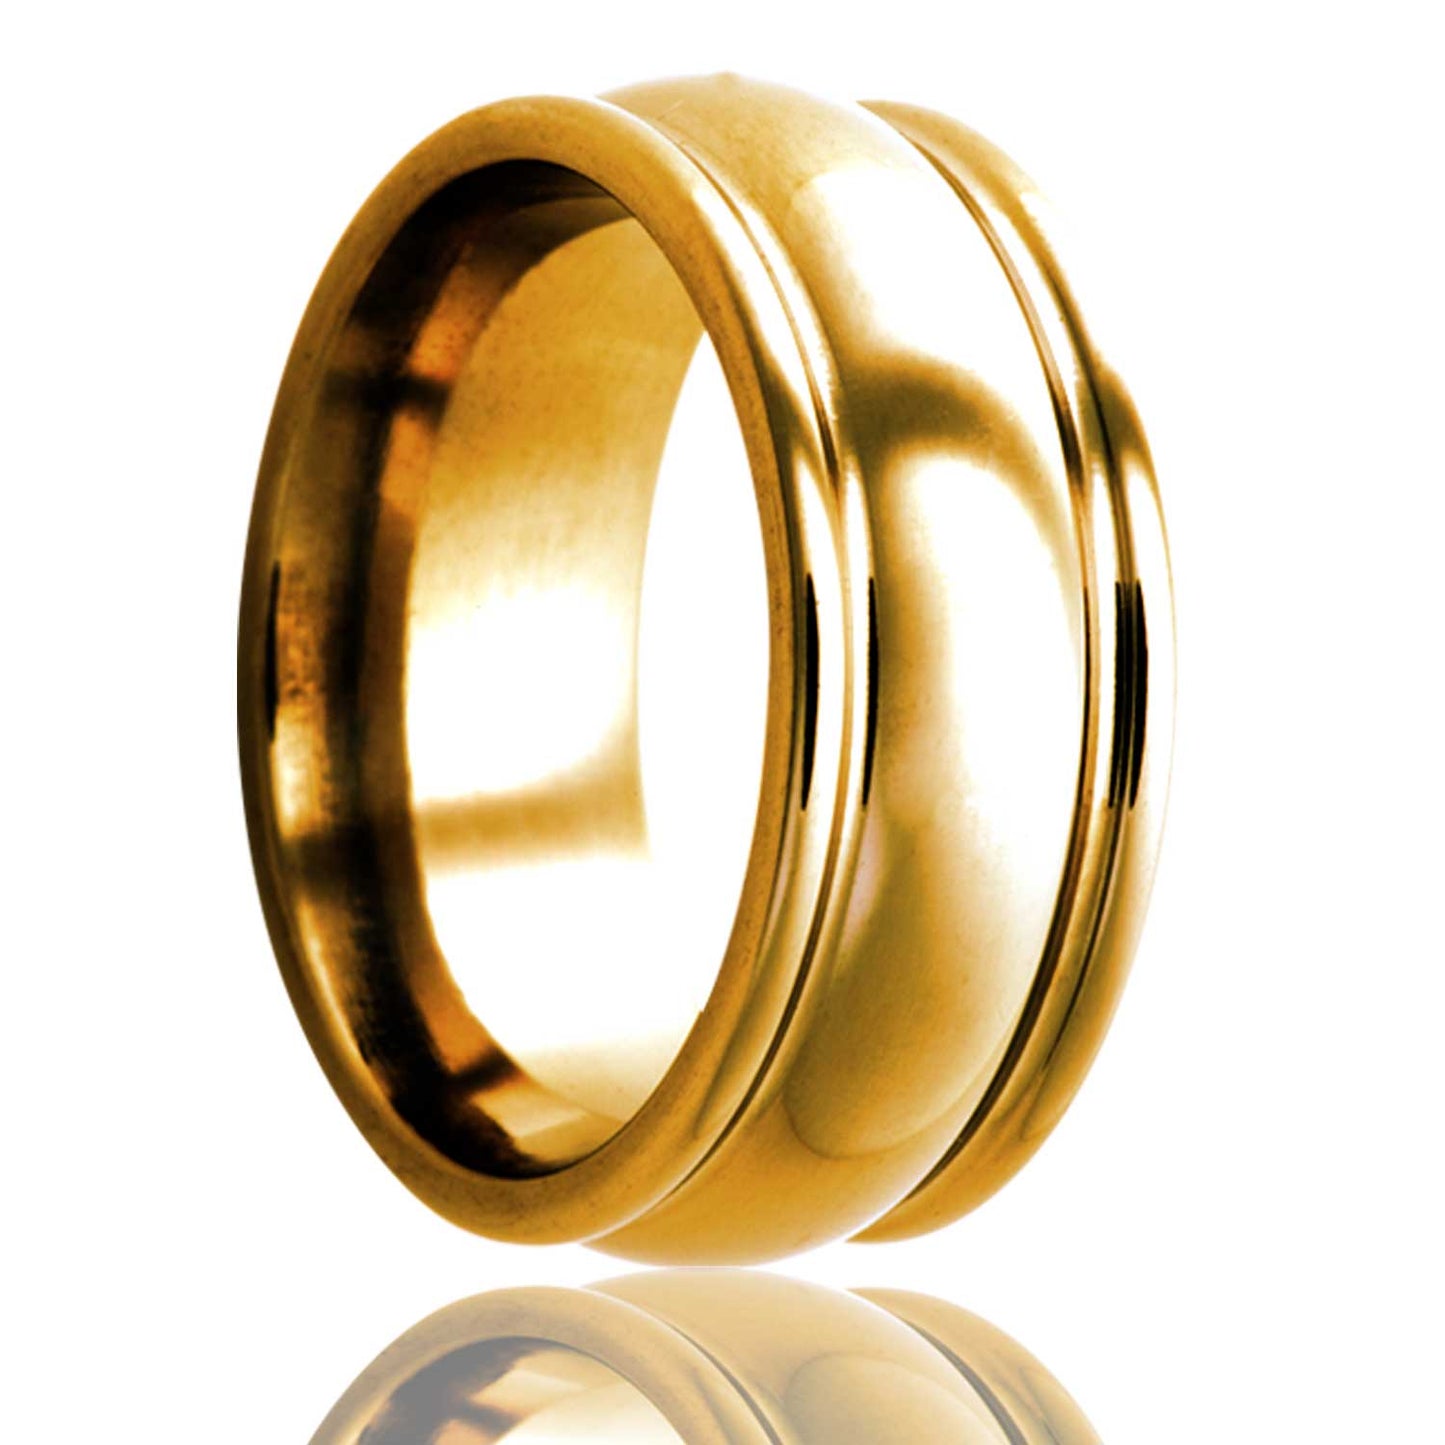 A 10k gold domed wedding band with dual grooves displayed on a neutral white background.